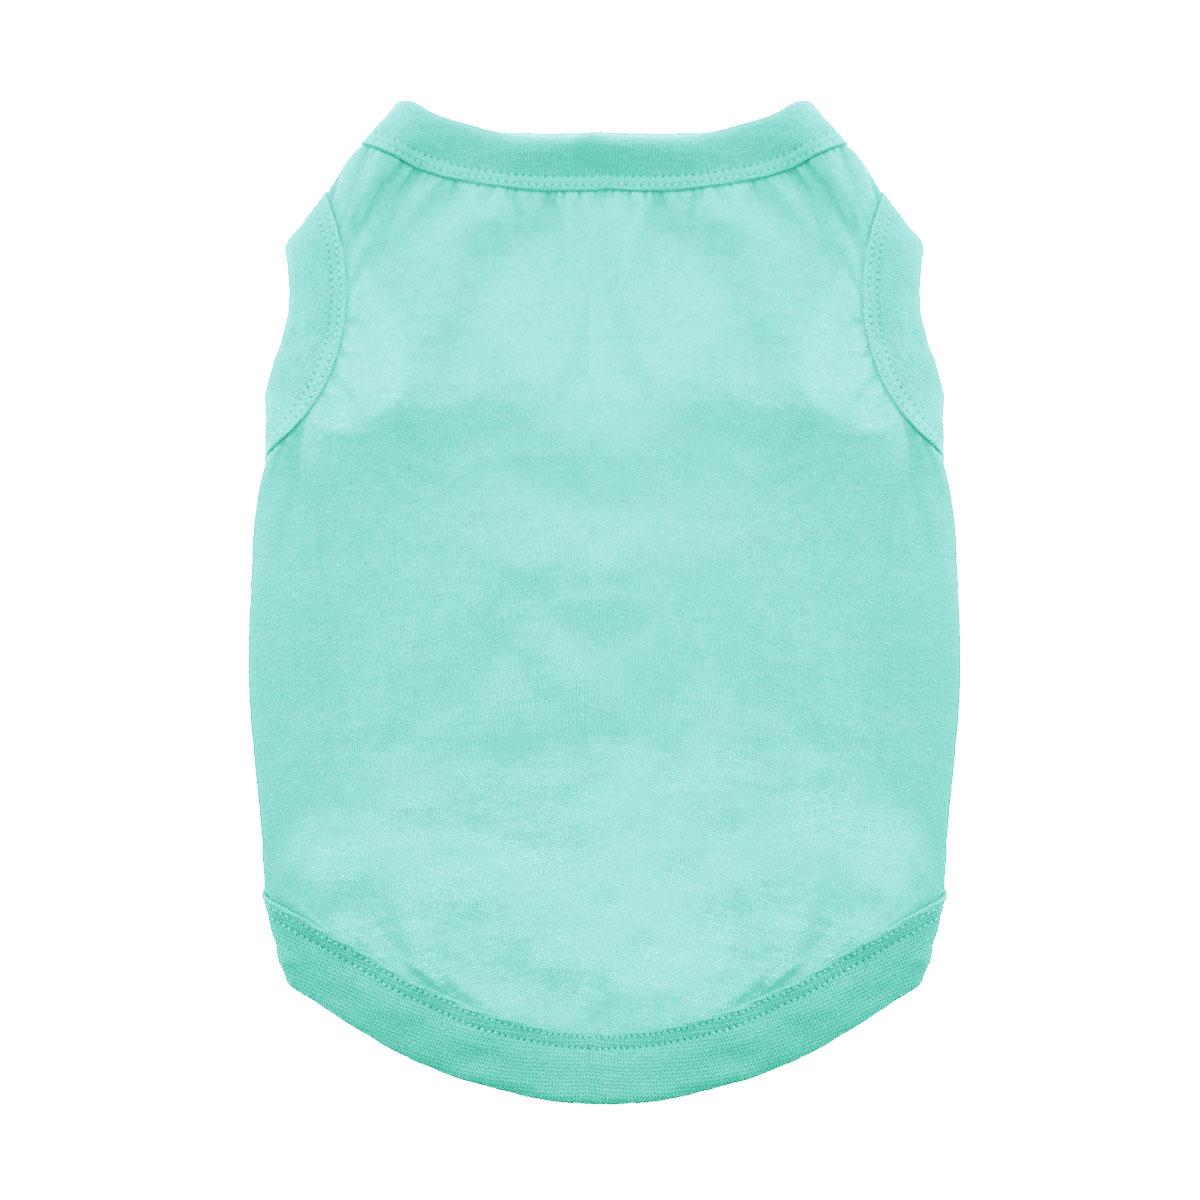 Cotton Dog Tank by Doggie Design - Teal